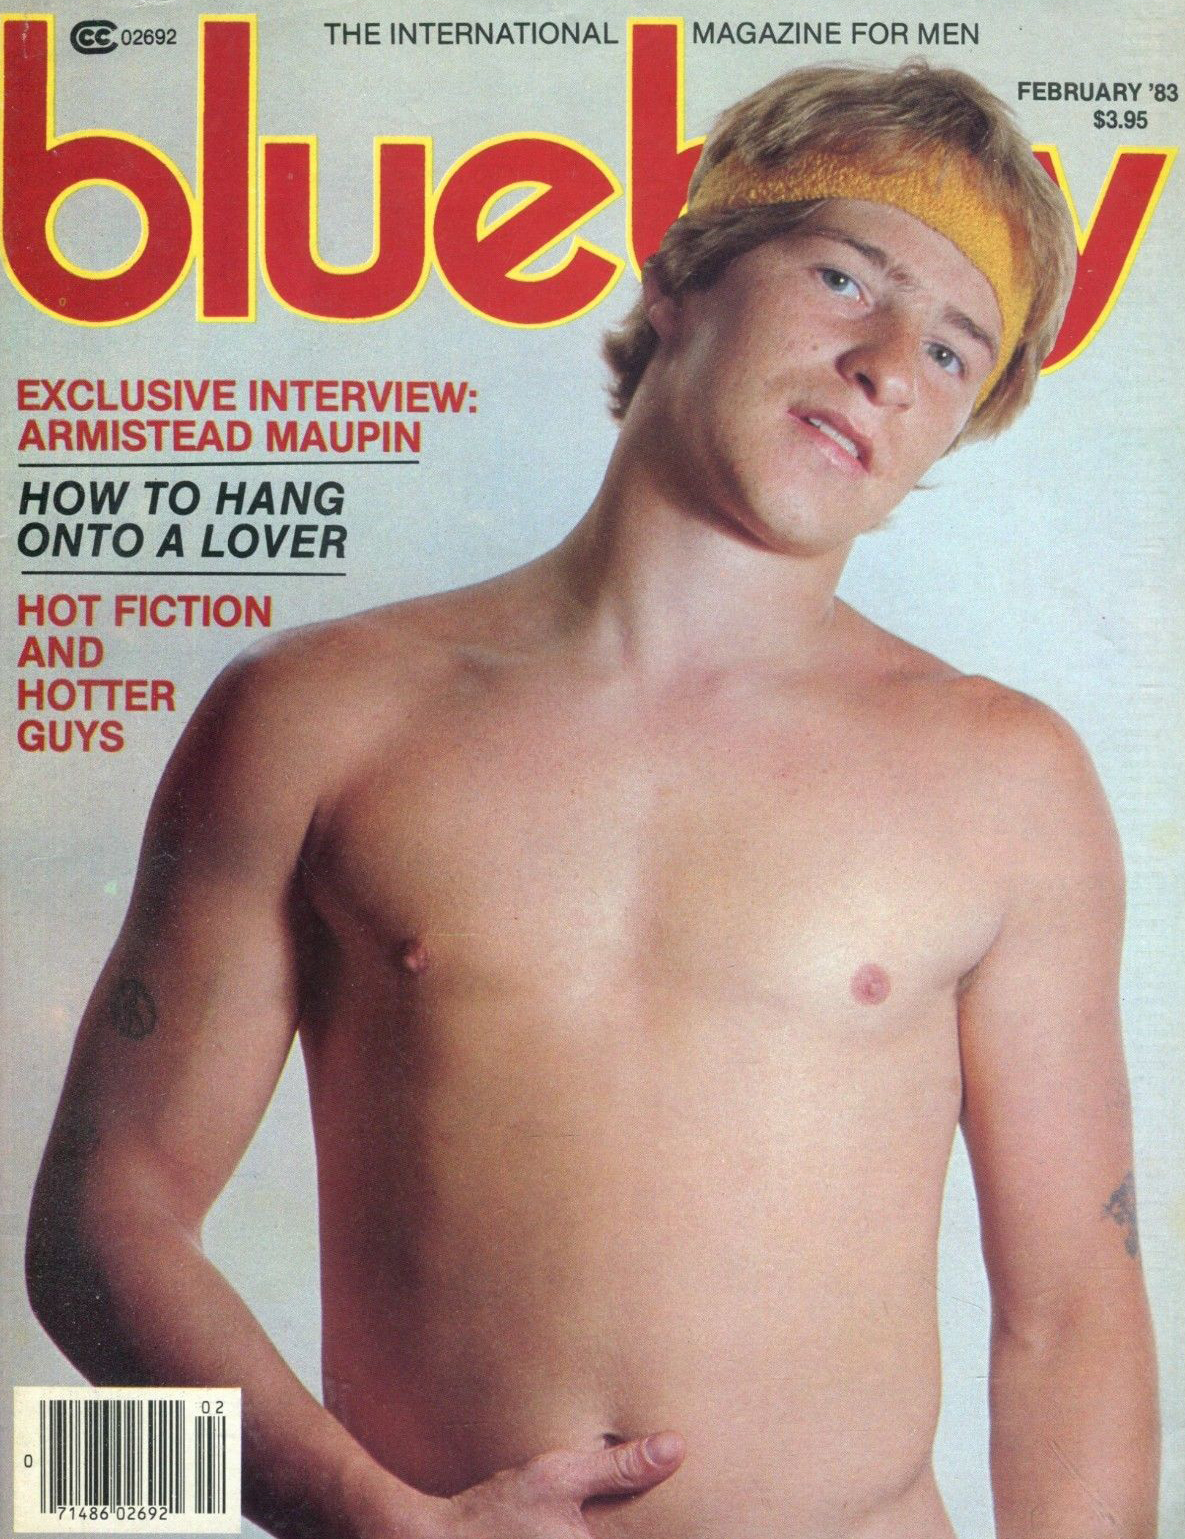 Blueboy February 1983 magazine back issue Blueboy magizine back copy Blueboy February 1983 Gay Mens Magazine Back Issue Publishing Photos of Naked Men. Exclusive Interview: Armistead Maupin.